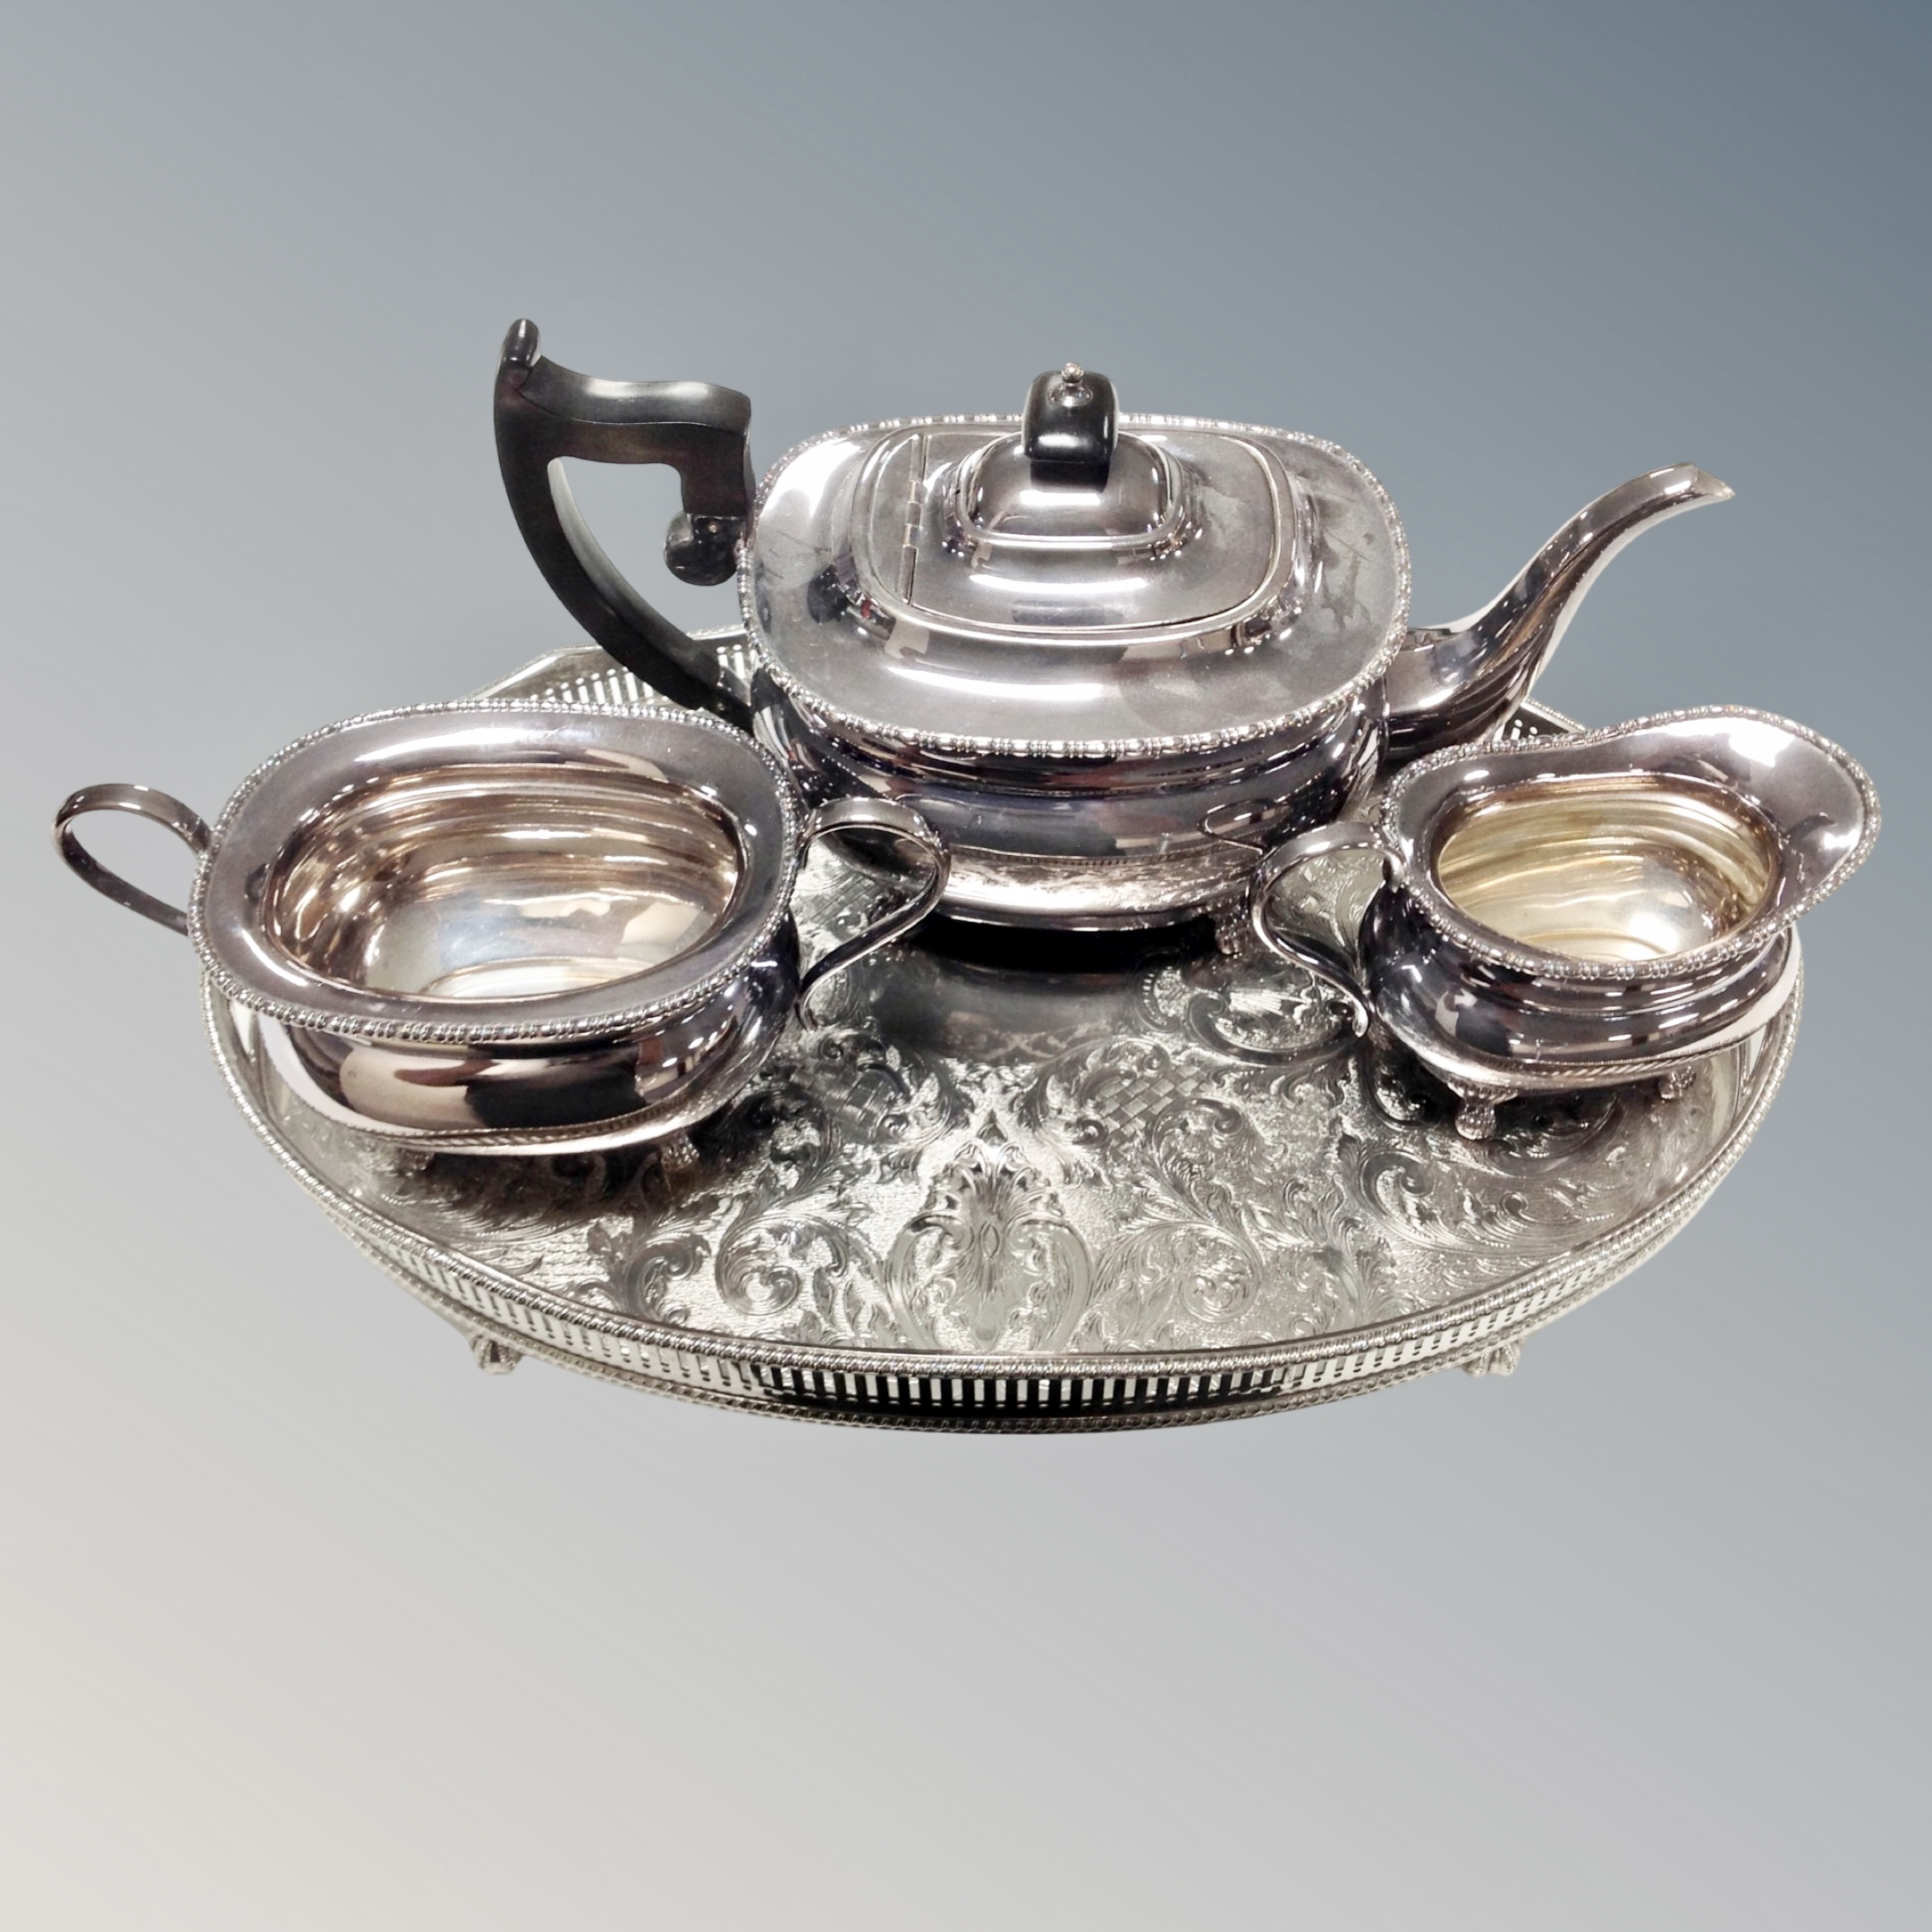 A three piece Viners plated tea service on gallery tray (4)